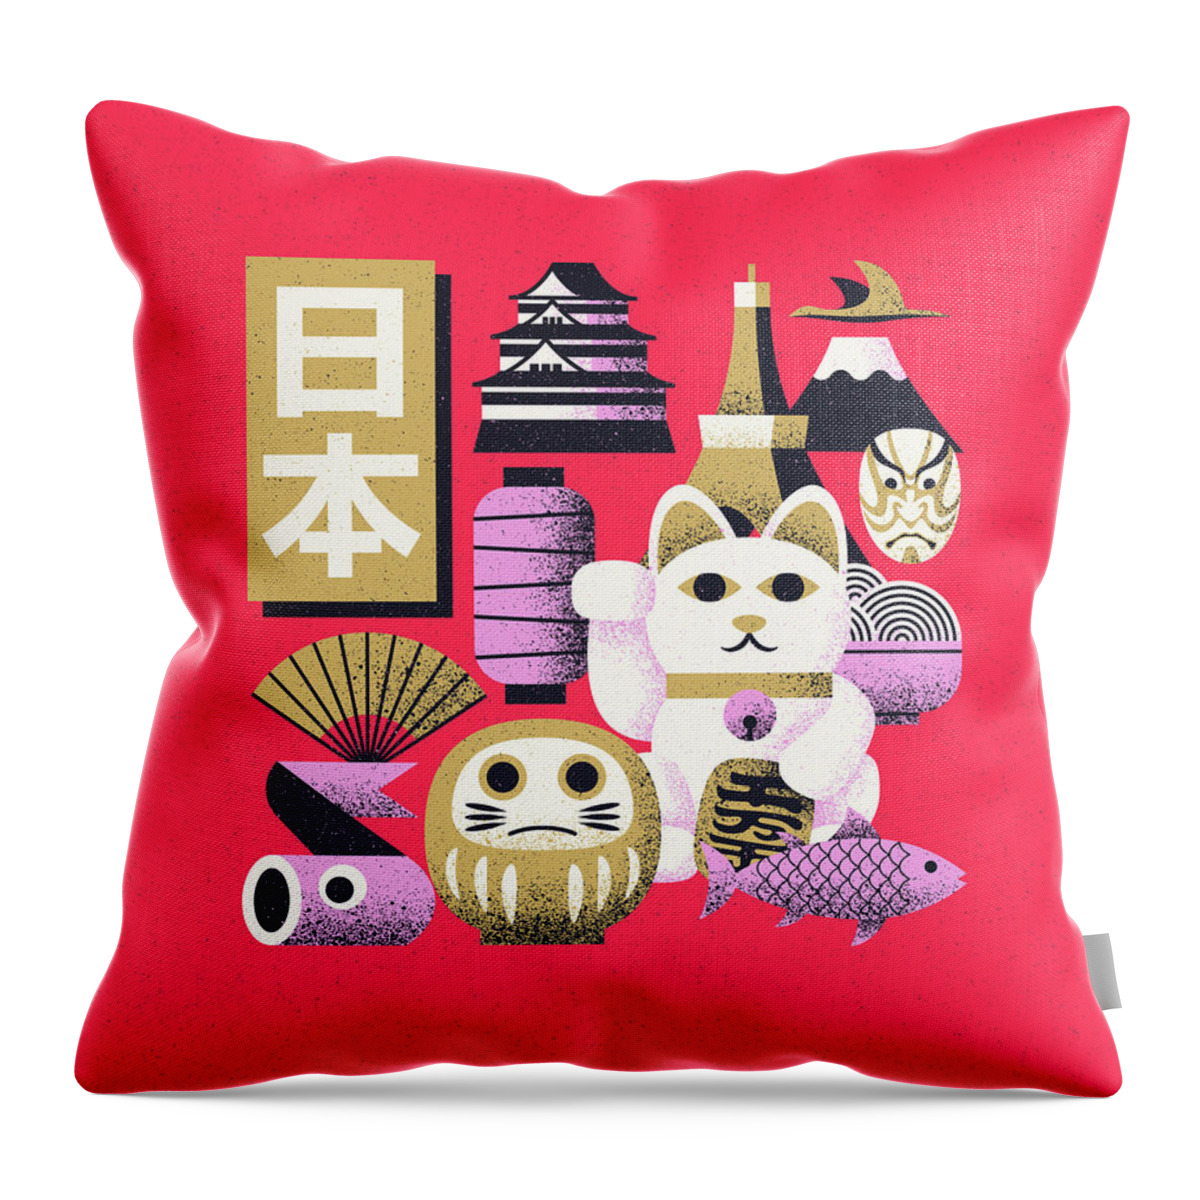 Japan Throw Pillow featuring the digital art Japan Theme Elements Retro - Red by Organic Synthesis